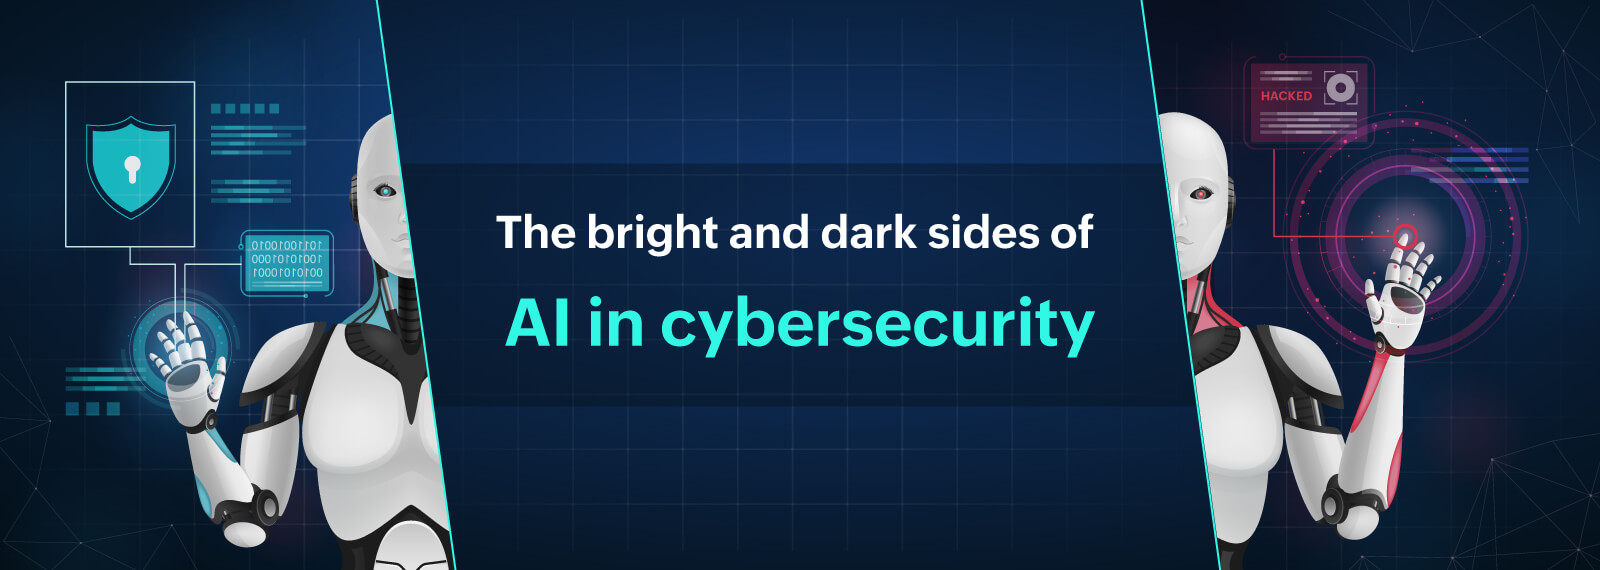 The bright and dark sides of AI in cybersecurity